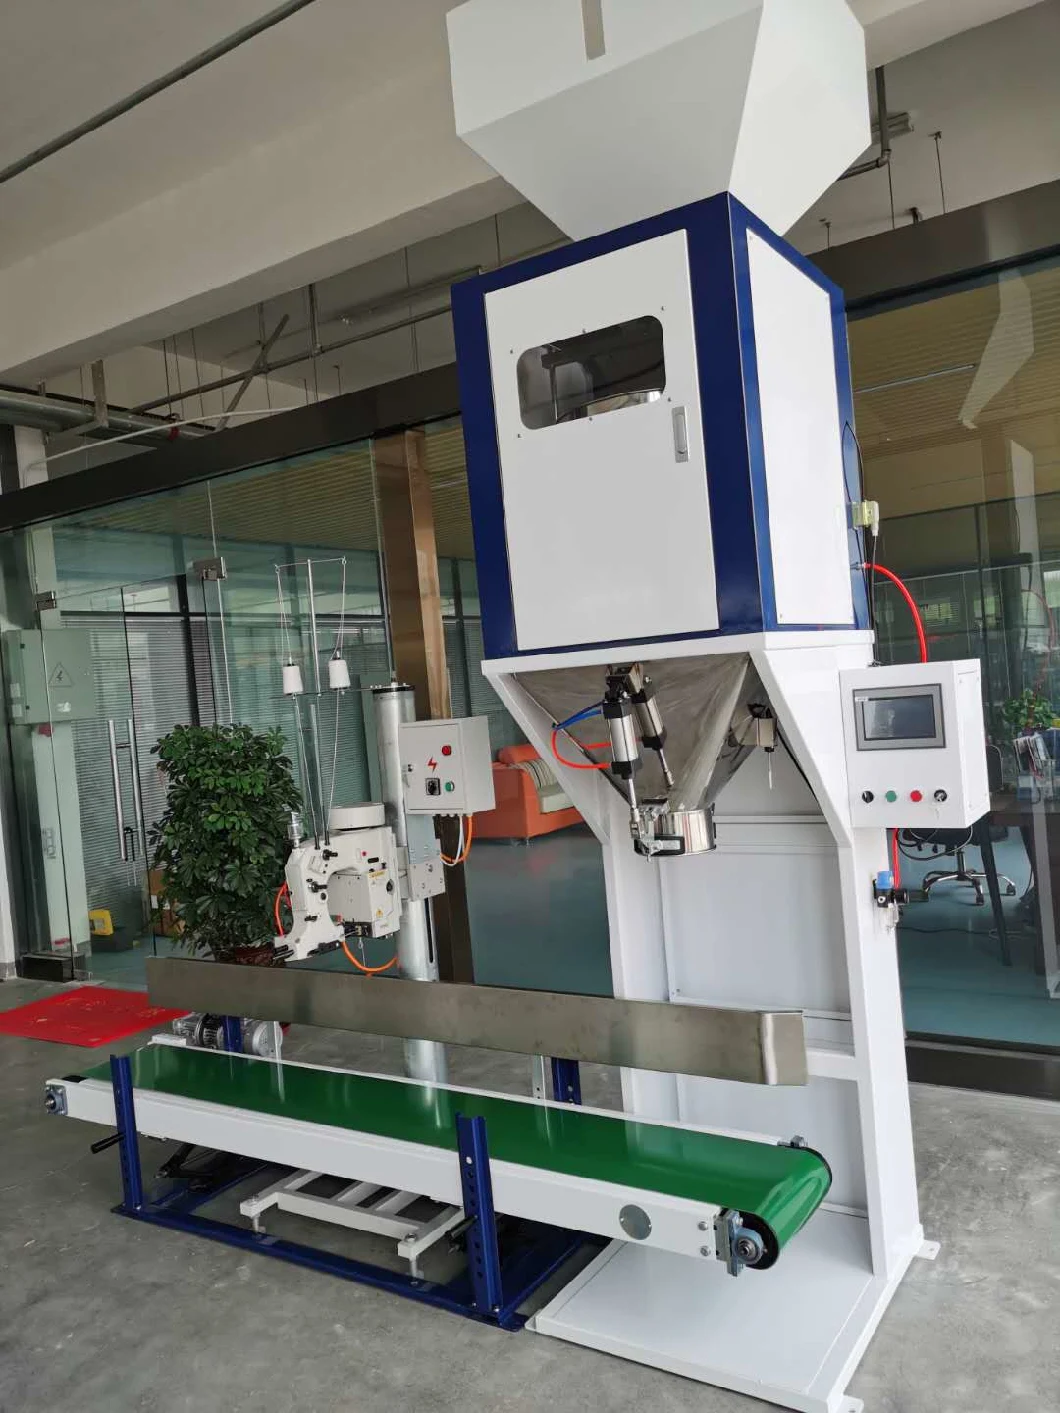 Rice Seed Fertilizer Pellet Weighing Packing Machine for 50kg Bag